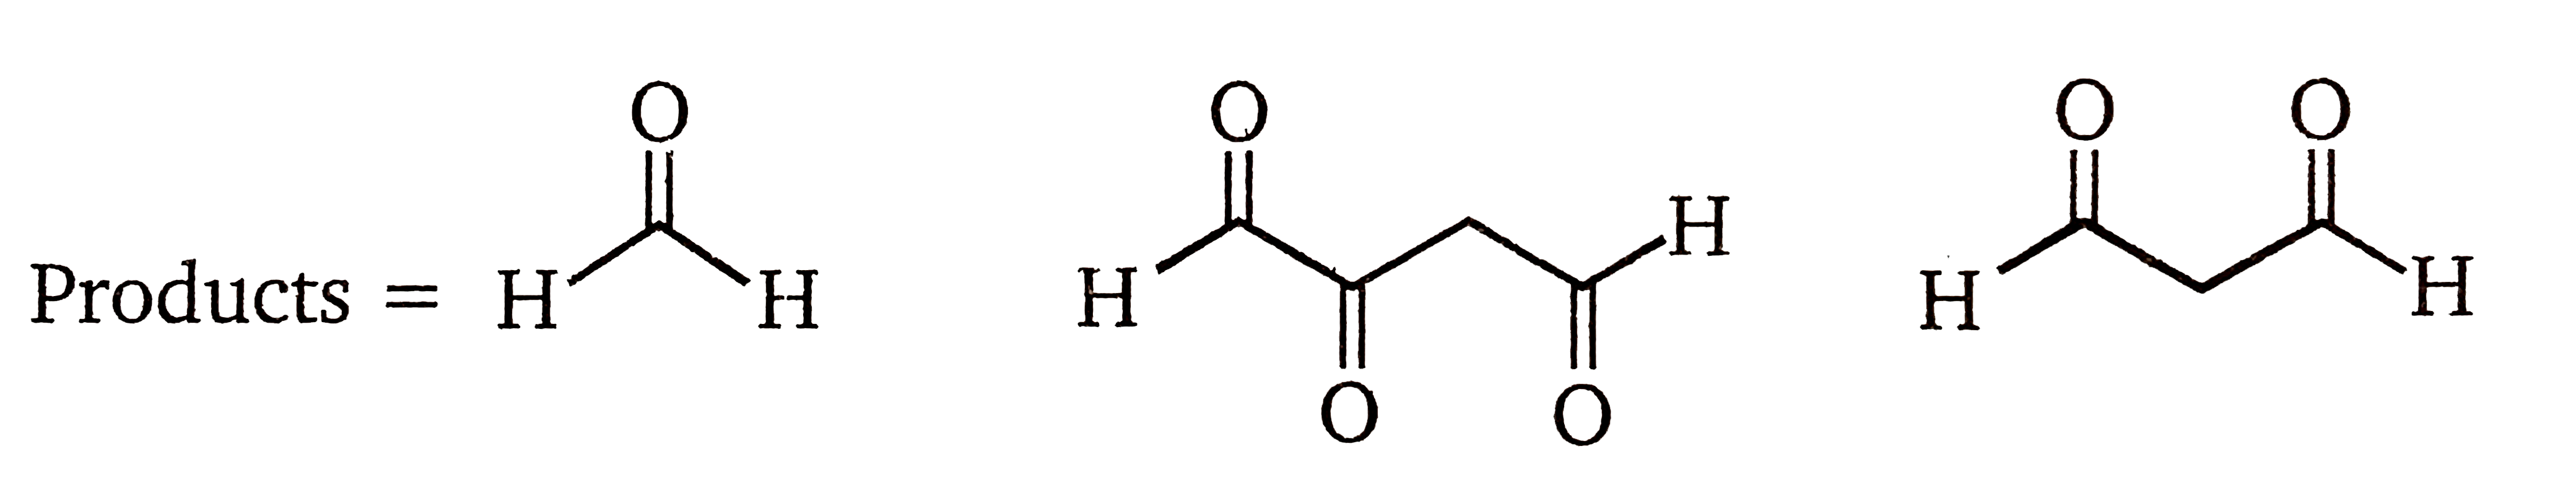 A triene is treated with ozone followed by zinc in acetic acid to give the following three products. What is the structure of the triene?